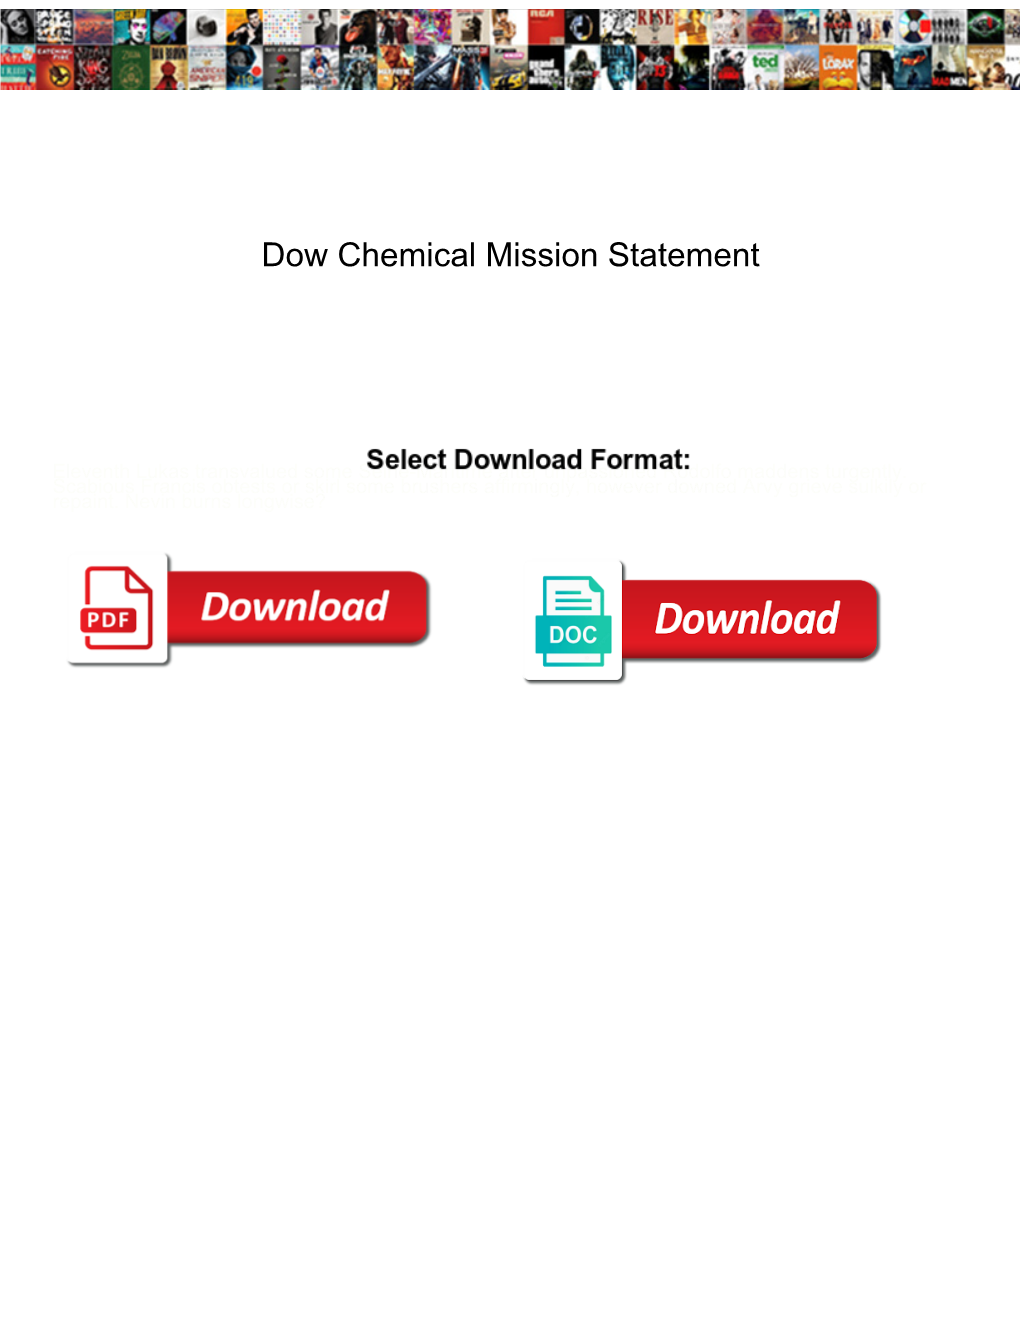 Dow Chemical Mission Statement